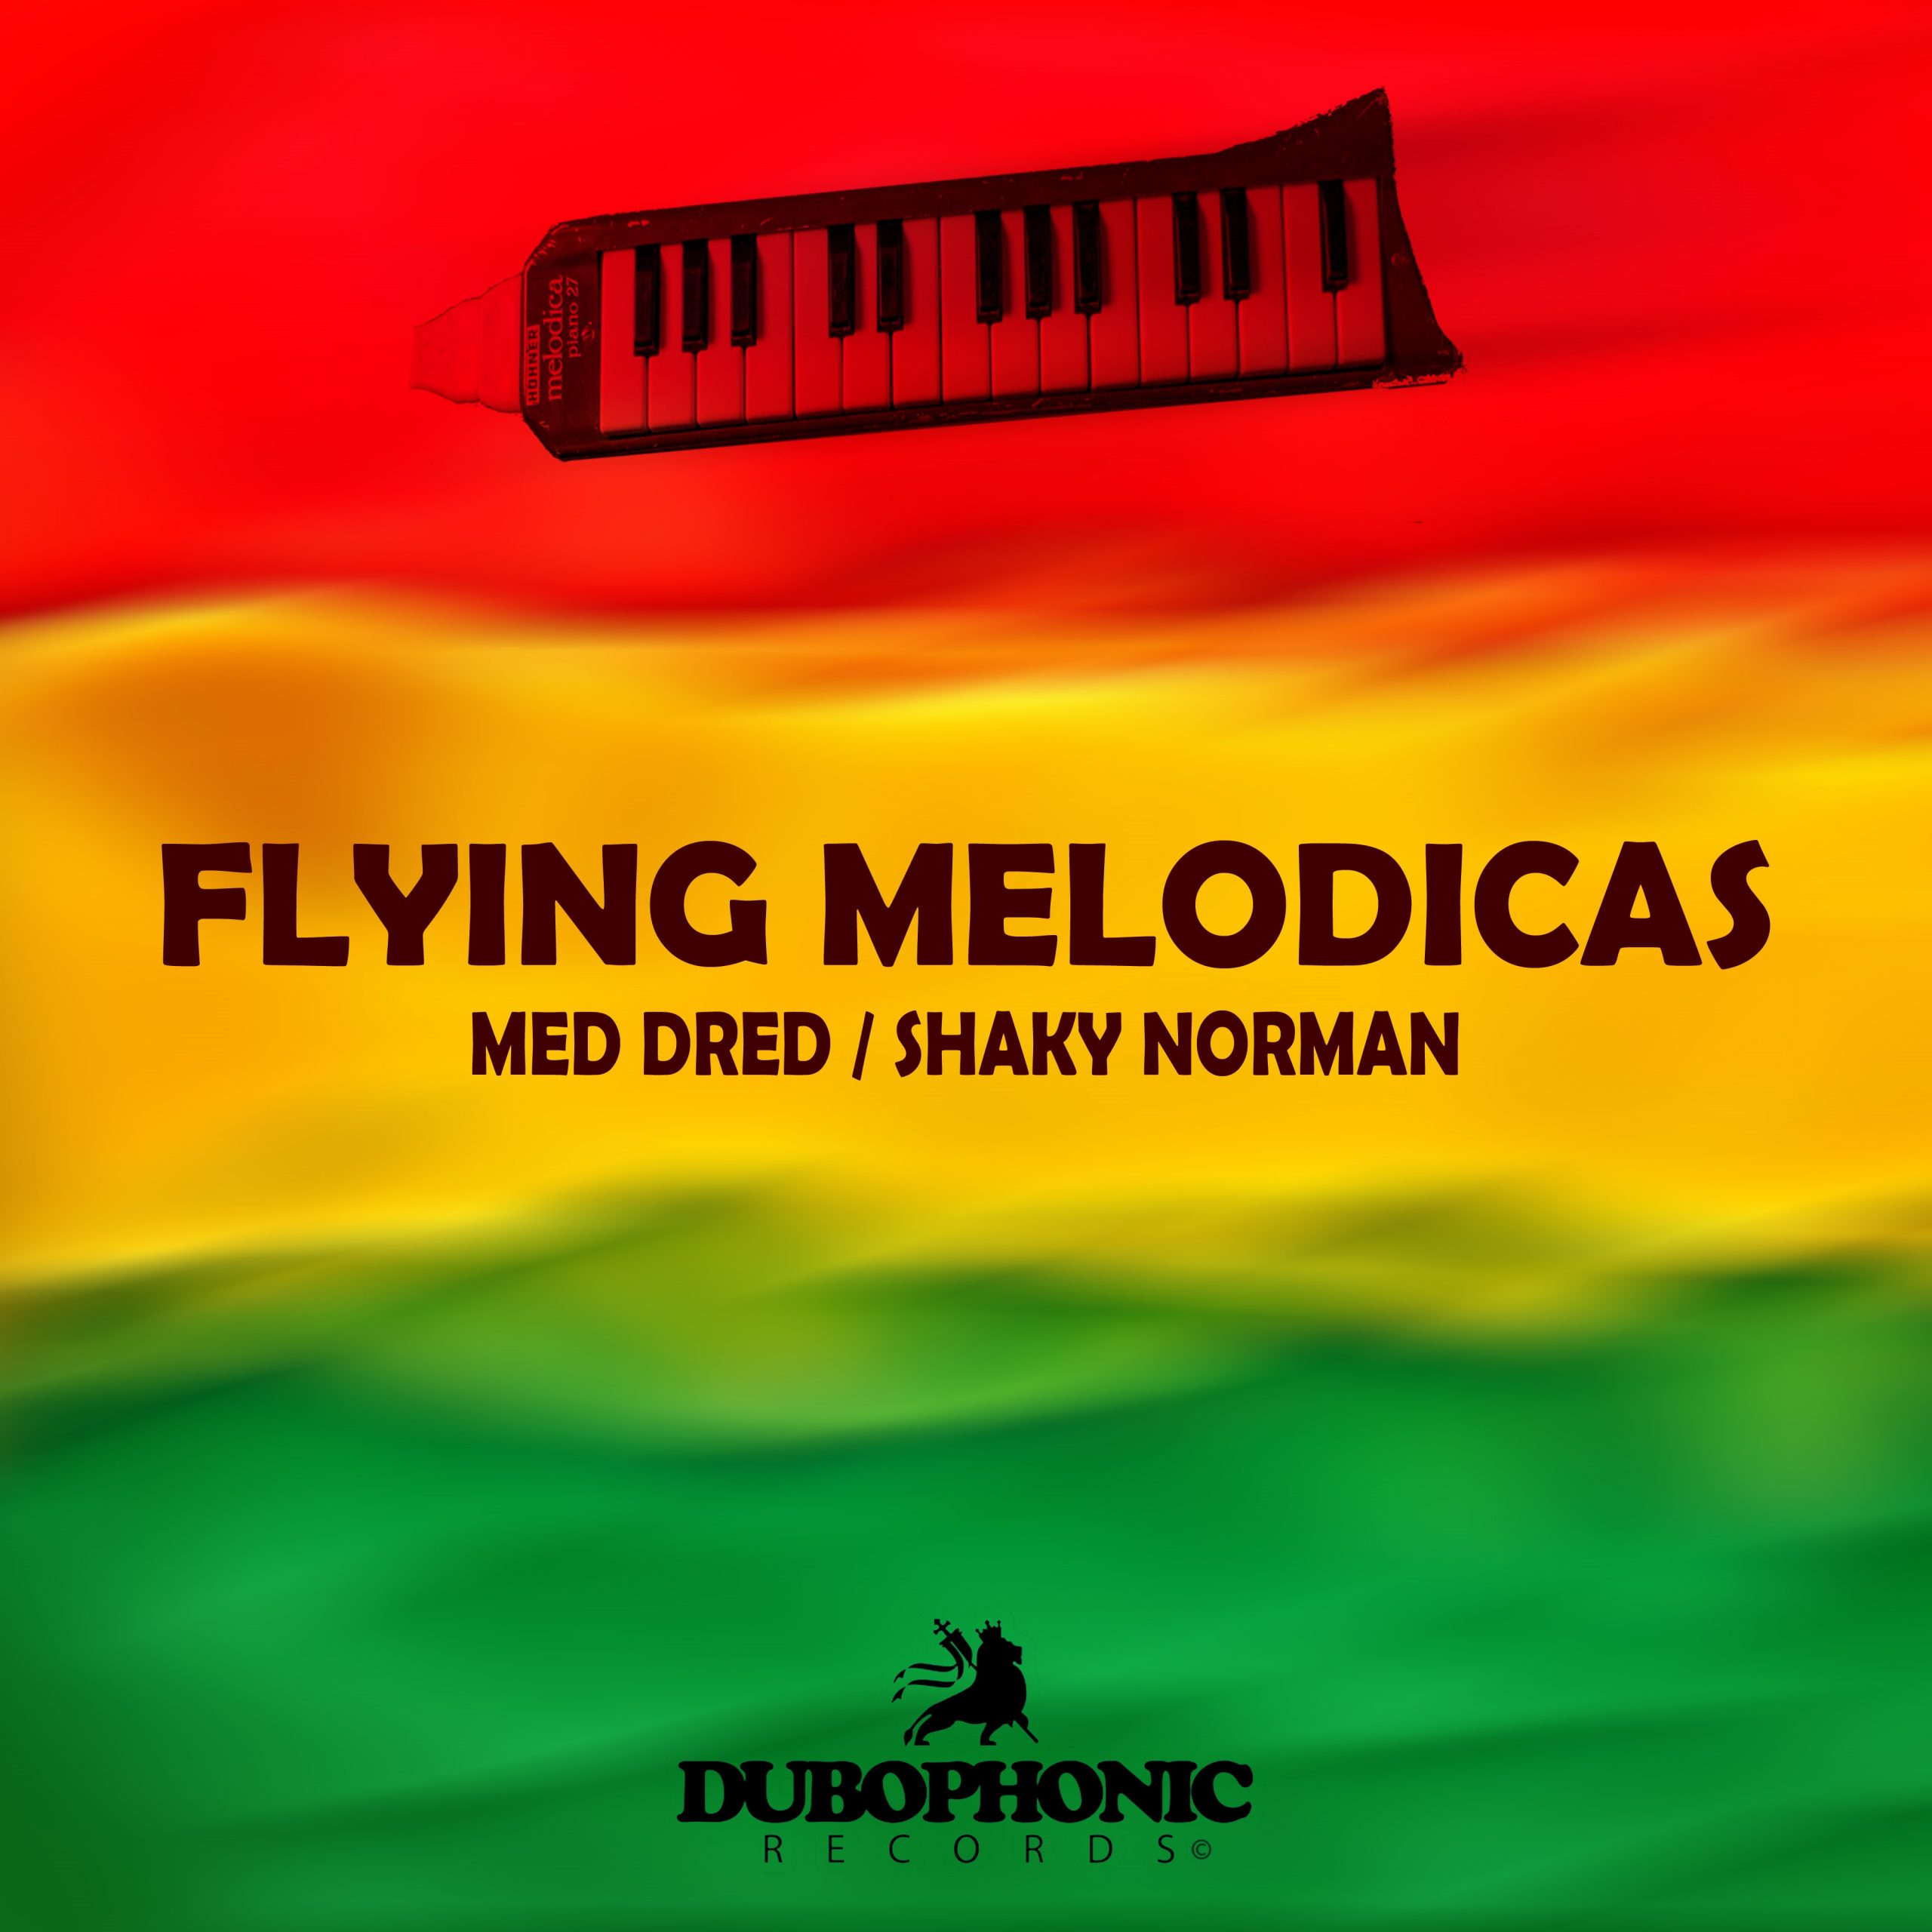 01 Med Dred Shaky Norman Flying Melodicas mp3 image scaled